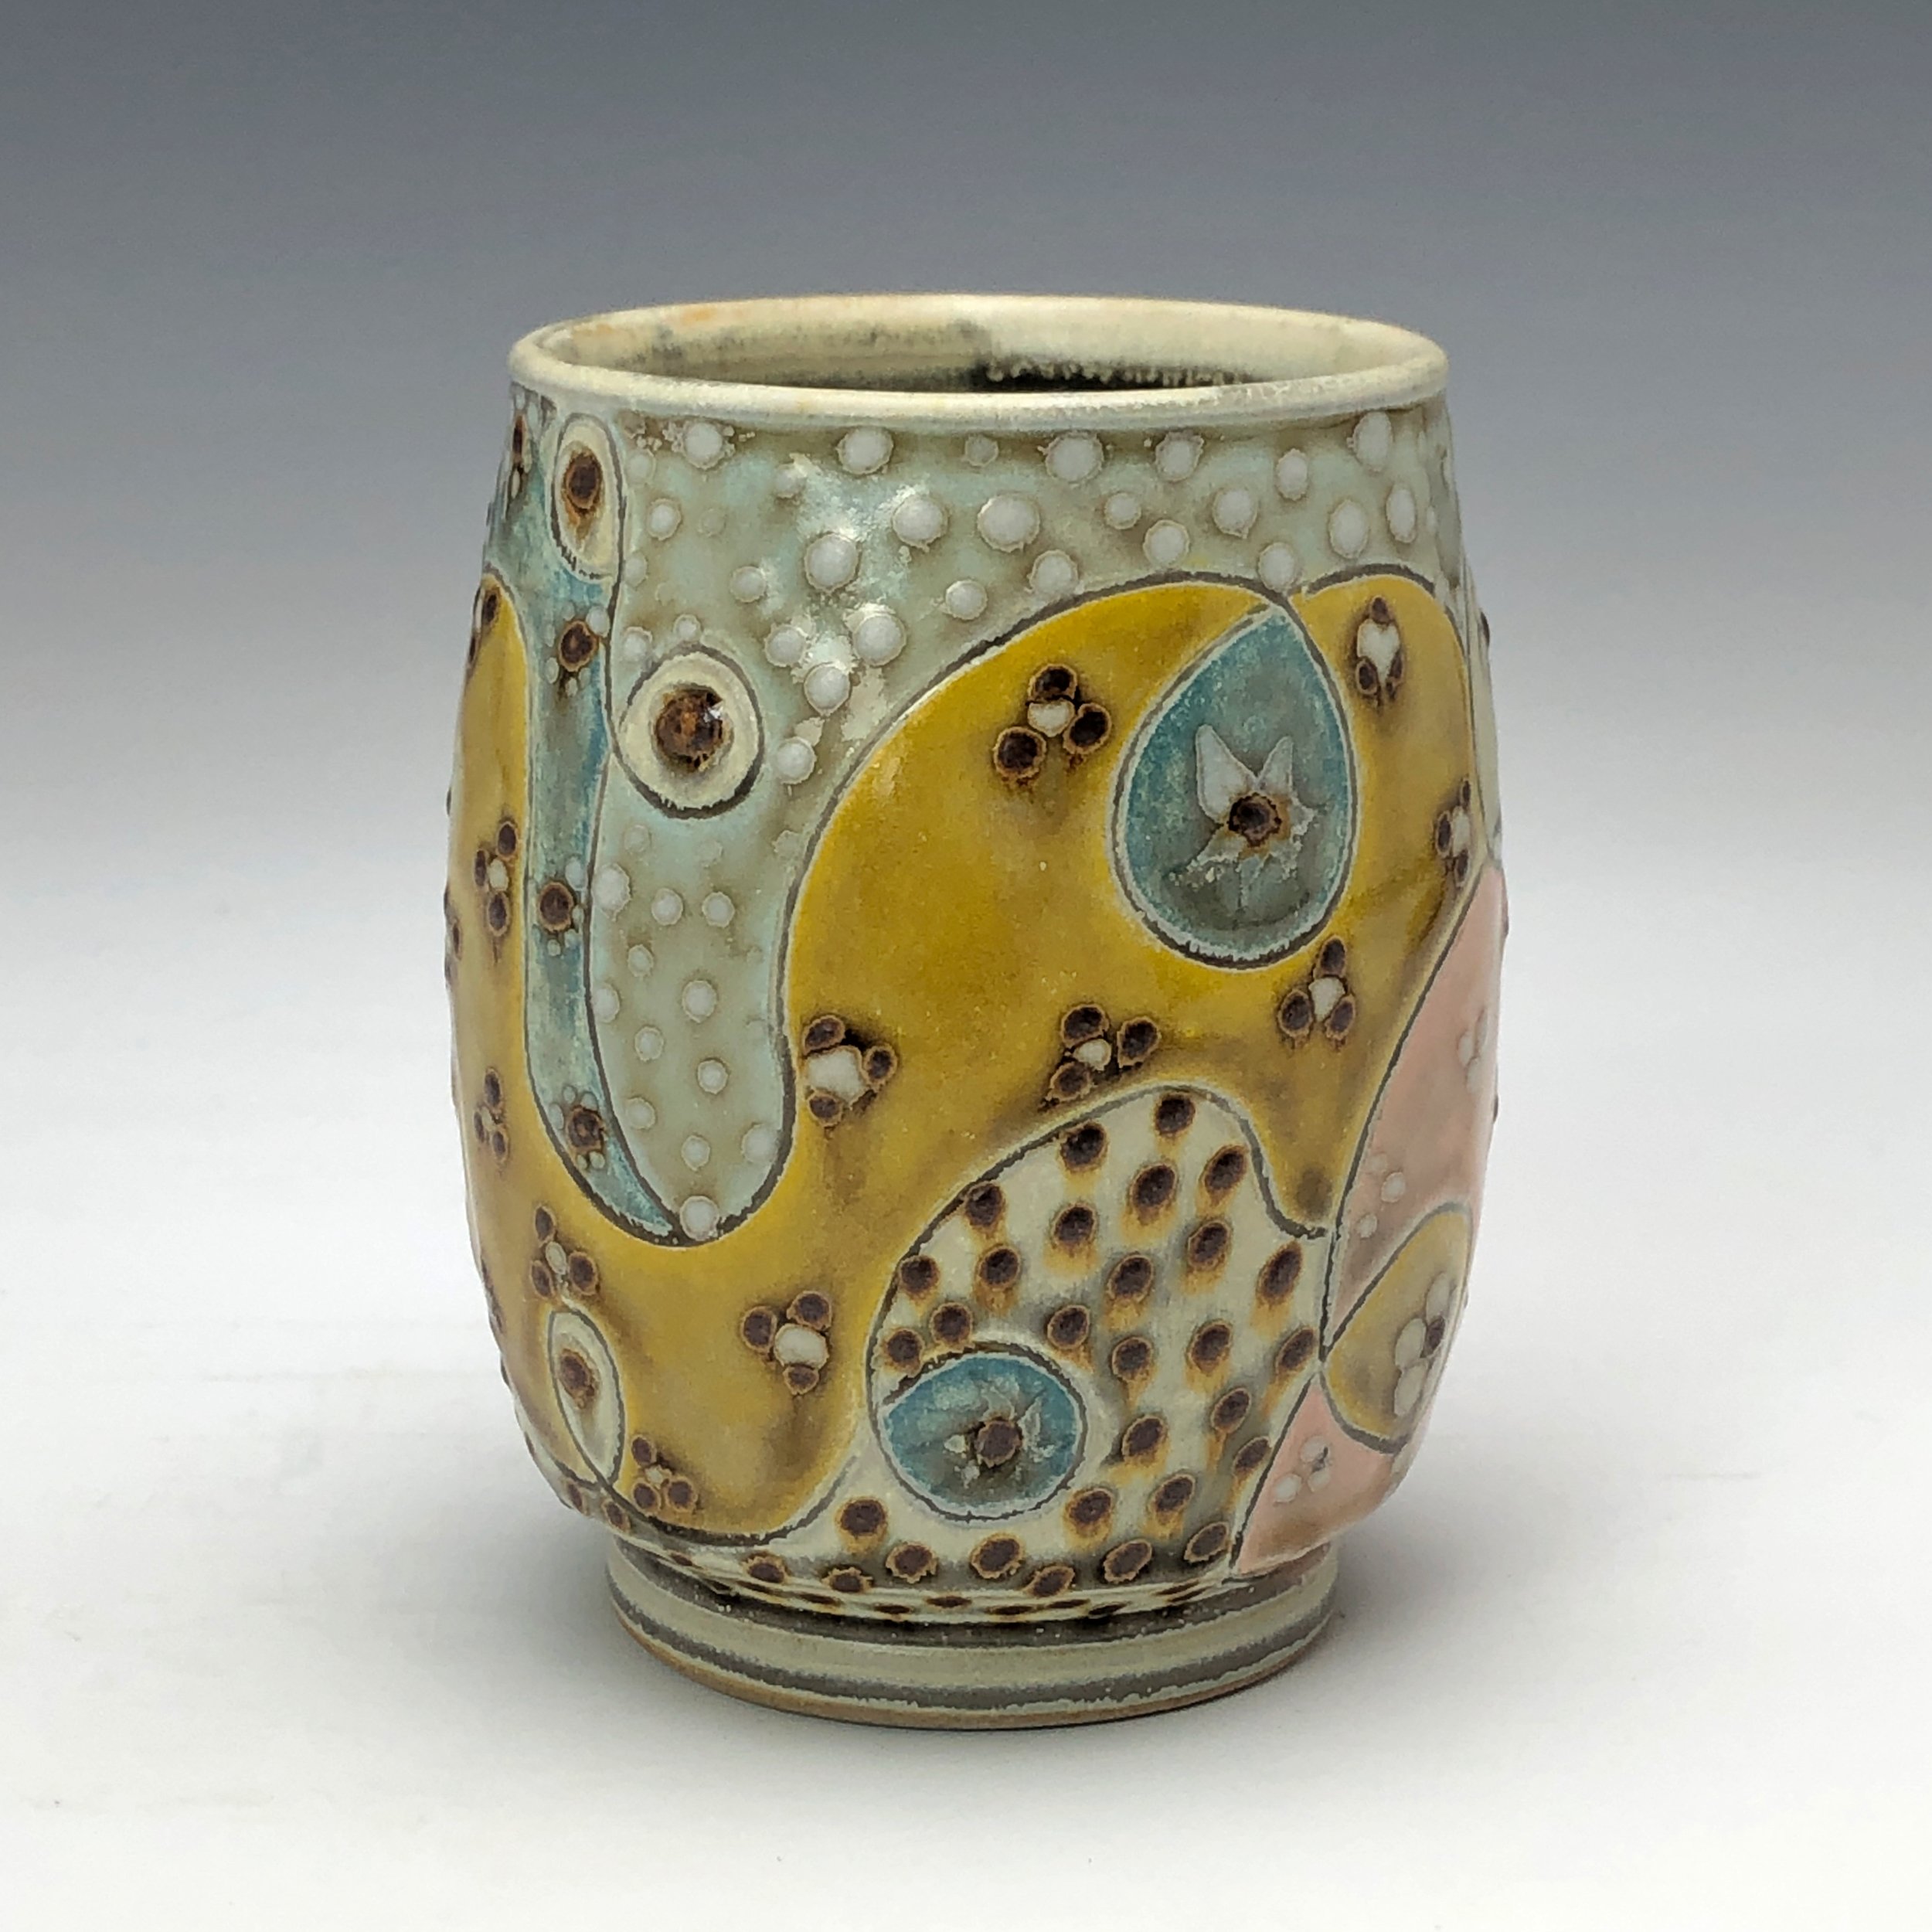  Samantha Henneke, Bulldog Pottery, Seagrove, North Carolina  Yunomi 2- Casual drinking cup made from a smooth white porcelaneous clay body. Pattern Medley patterns are made with slip and glaze dot patterns. Translucent vellum glaze over various unde